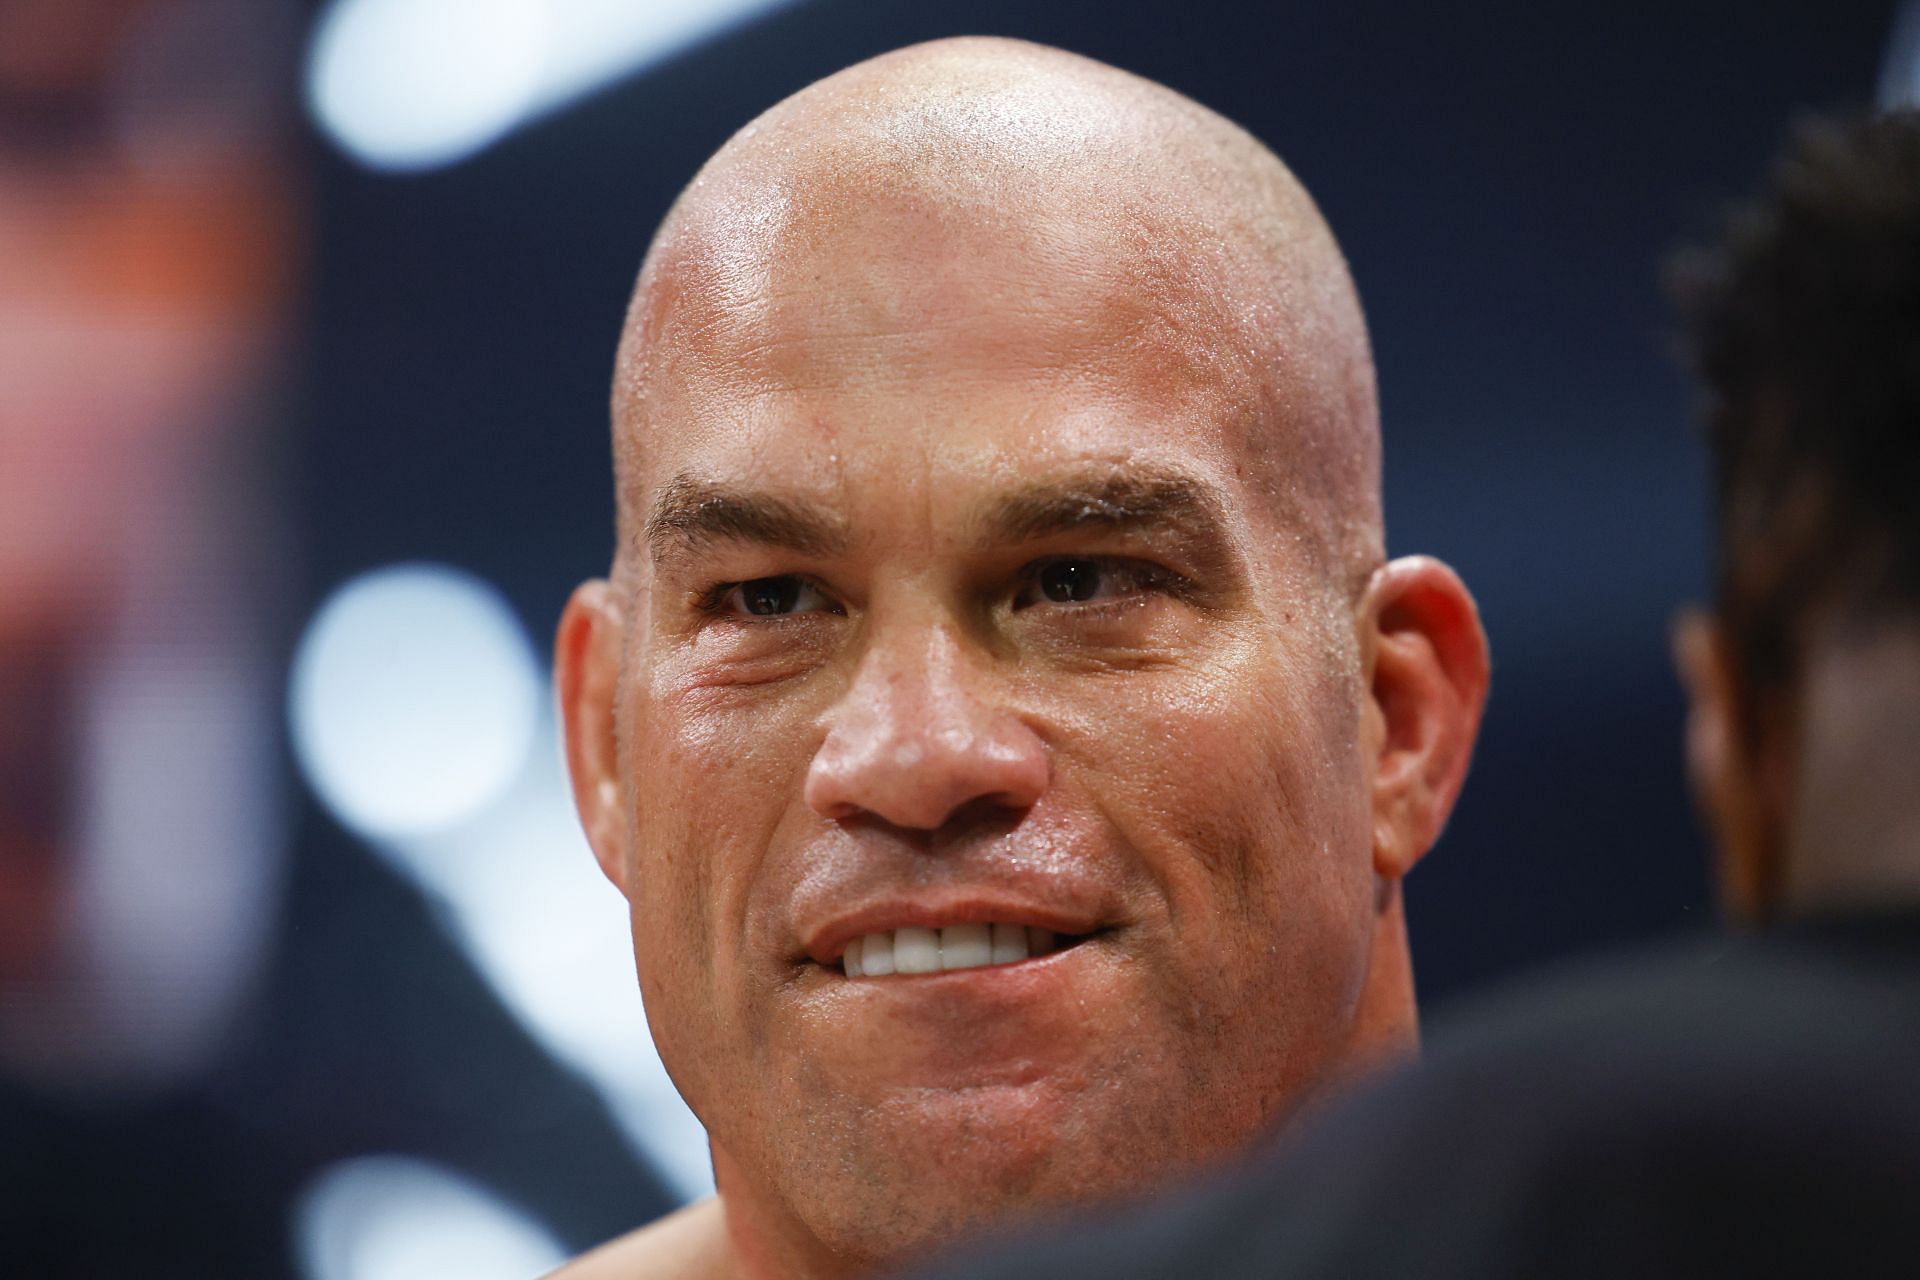 Tito Ortiz was welcomed back into the fold after his contract dispute